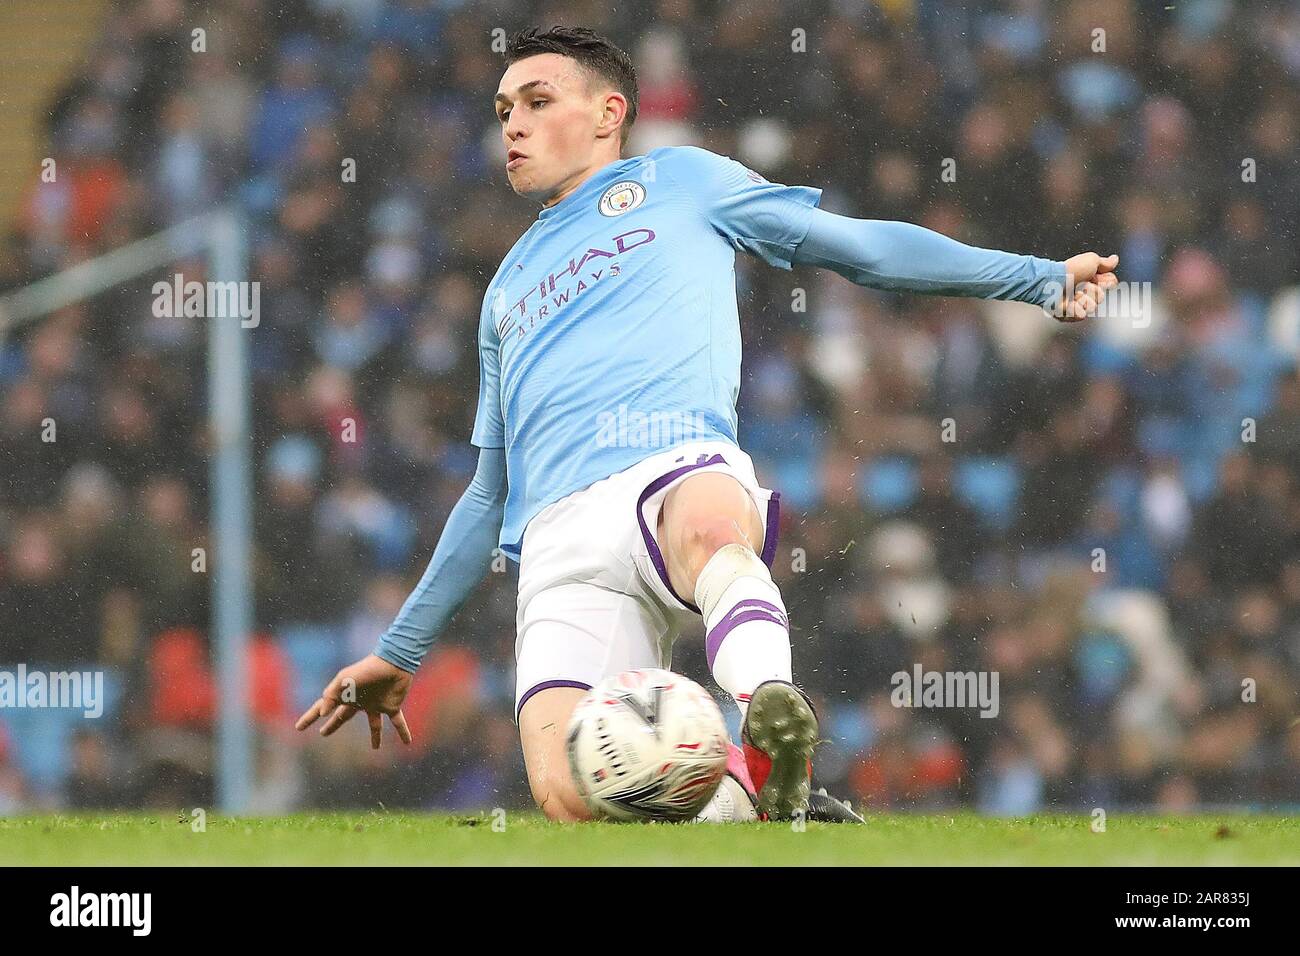 Manchester, UK. 26th Jan 2020.  Manchester City's Phil Foden in action during the FA Cup match between Manchester City and Fulham at the Etihad Stadium, Manchester on Sunday 26th January 2020. (Credit: Tim Markland | MI News) Photograph may only be used for newspaper and/or magazine editorial purposes, license required for commercial use Credit: MI News & Sport /Alamy Live News Stock Photo